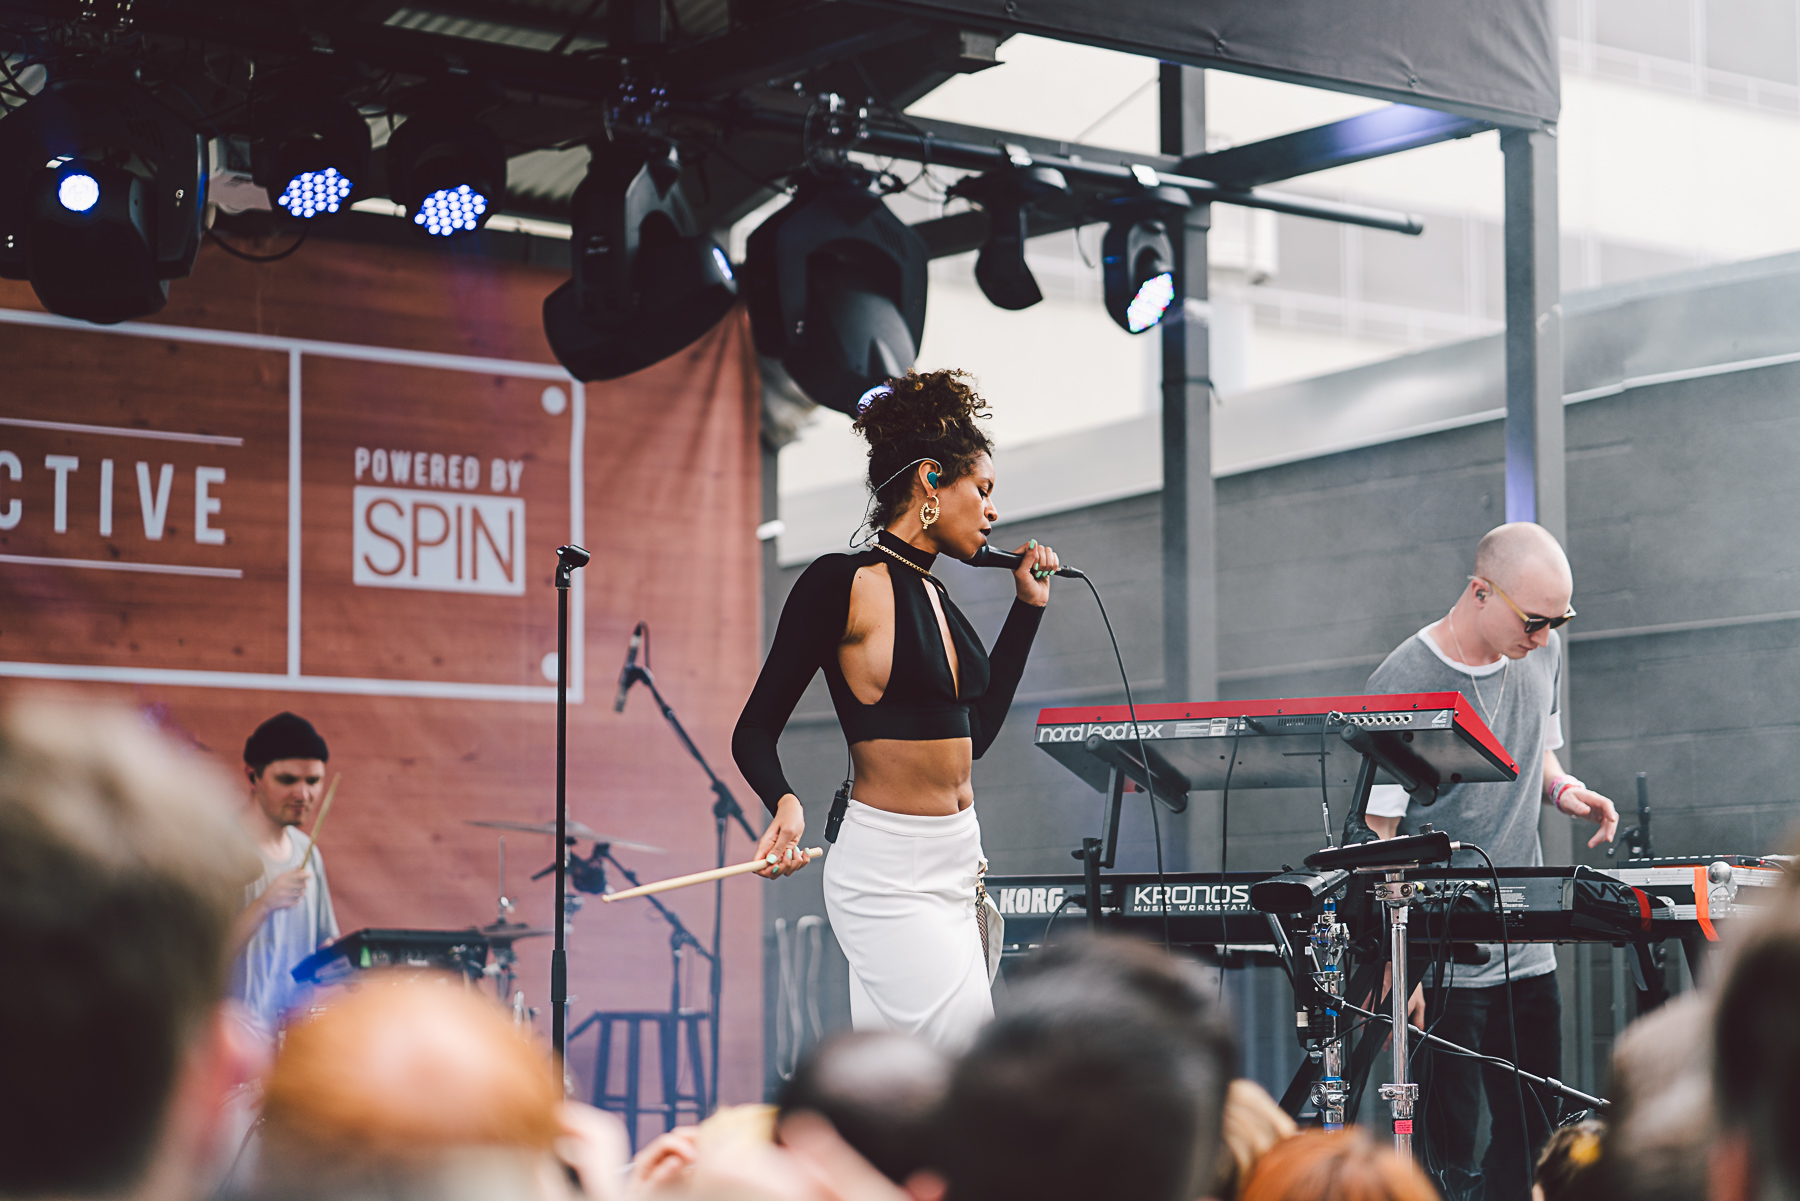 John Legend, AlunaGeorge, Rae Sremmurd and More Play AXE Collective Party at SXSW